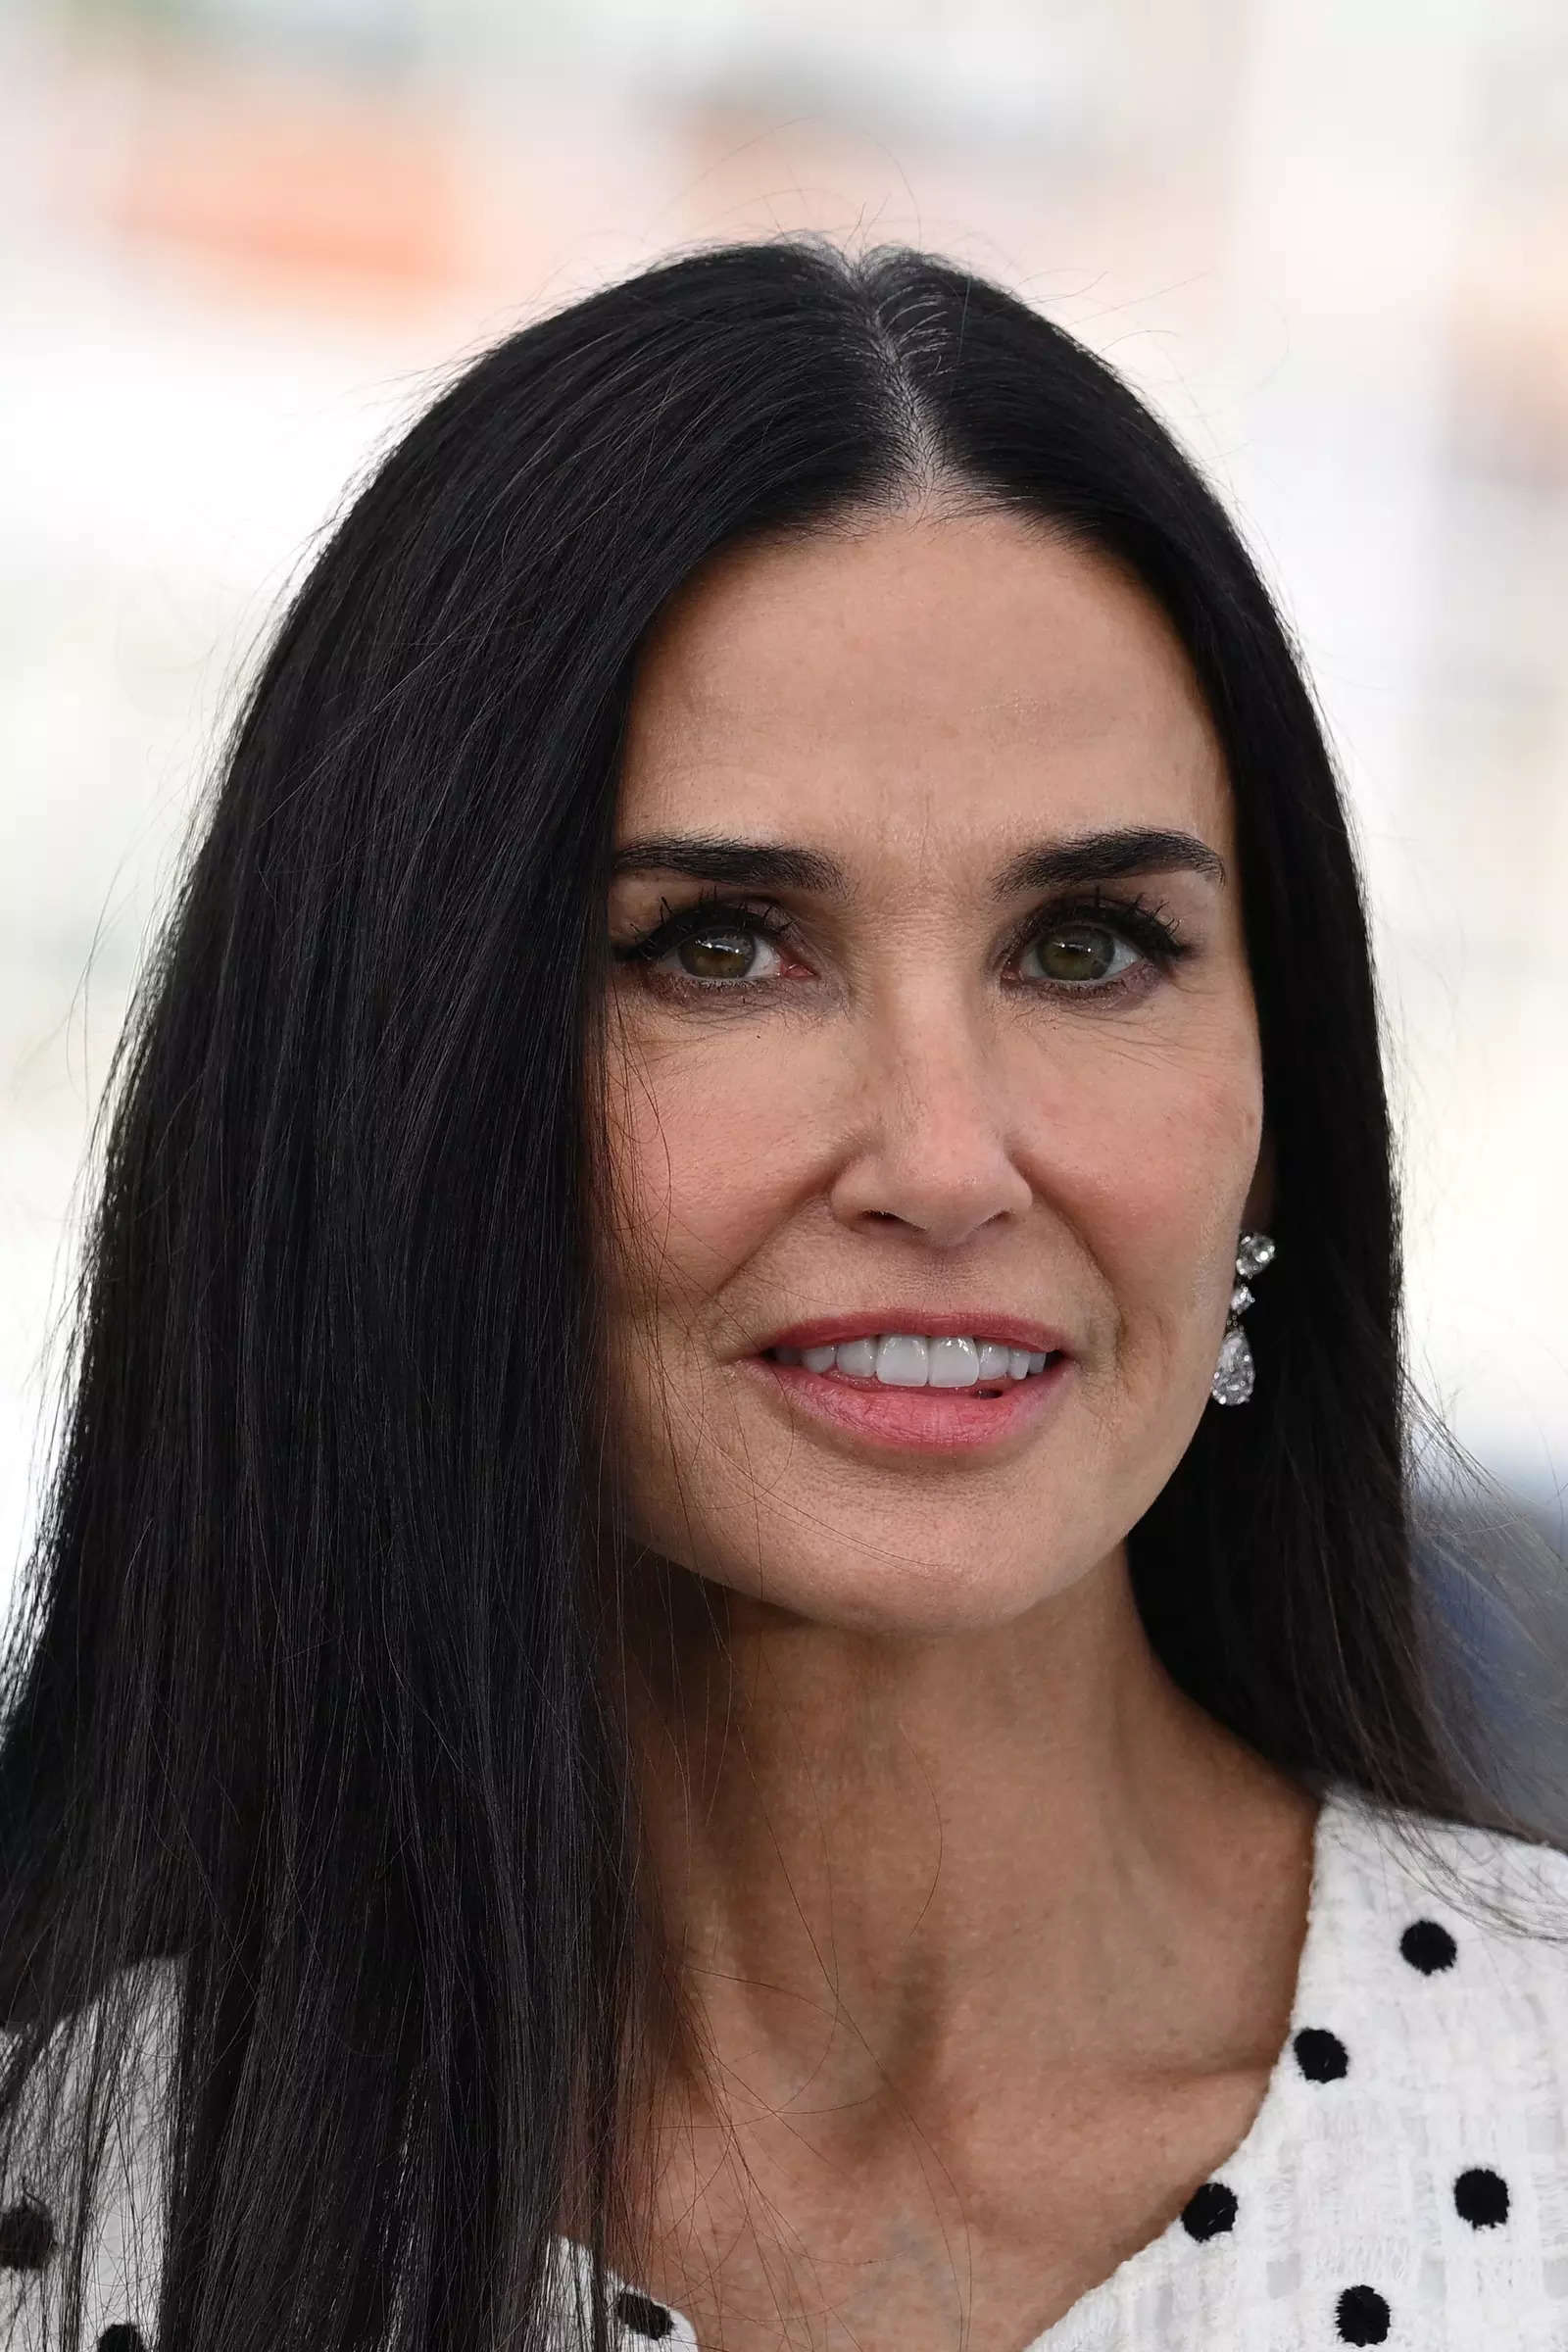 'The Substance': Reviews, trailer, cast and all about the Demi Moore starrer body-horror flick 